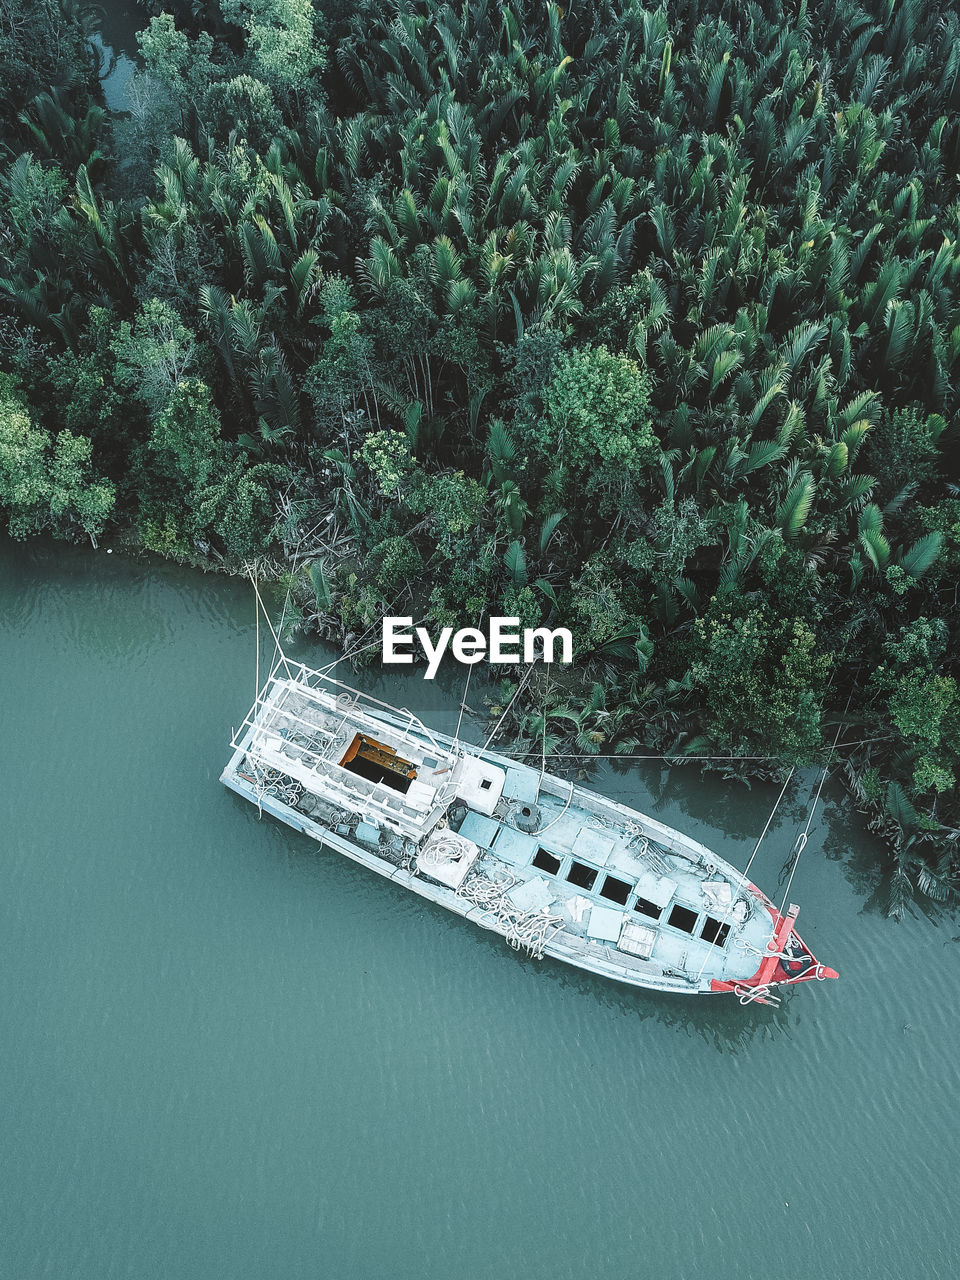 nautical vessel, water, transportation, mode of transportation, ship, plant, tree, vehicle, nature, boat, no people, high angle view, watercraft, green, day, growth, beauty in nature, travel, river, outdoors, tranquility, moored, aerial view, forest, scenics - nature, land, sailing